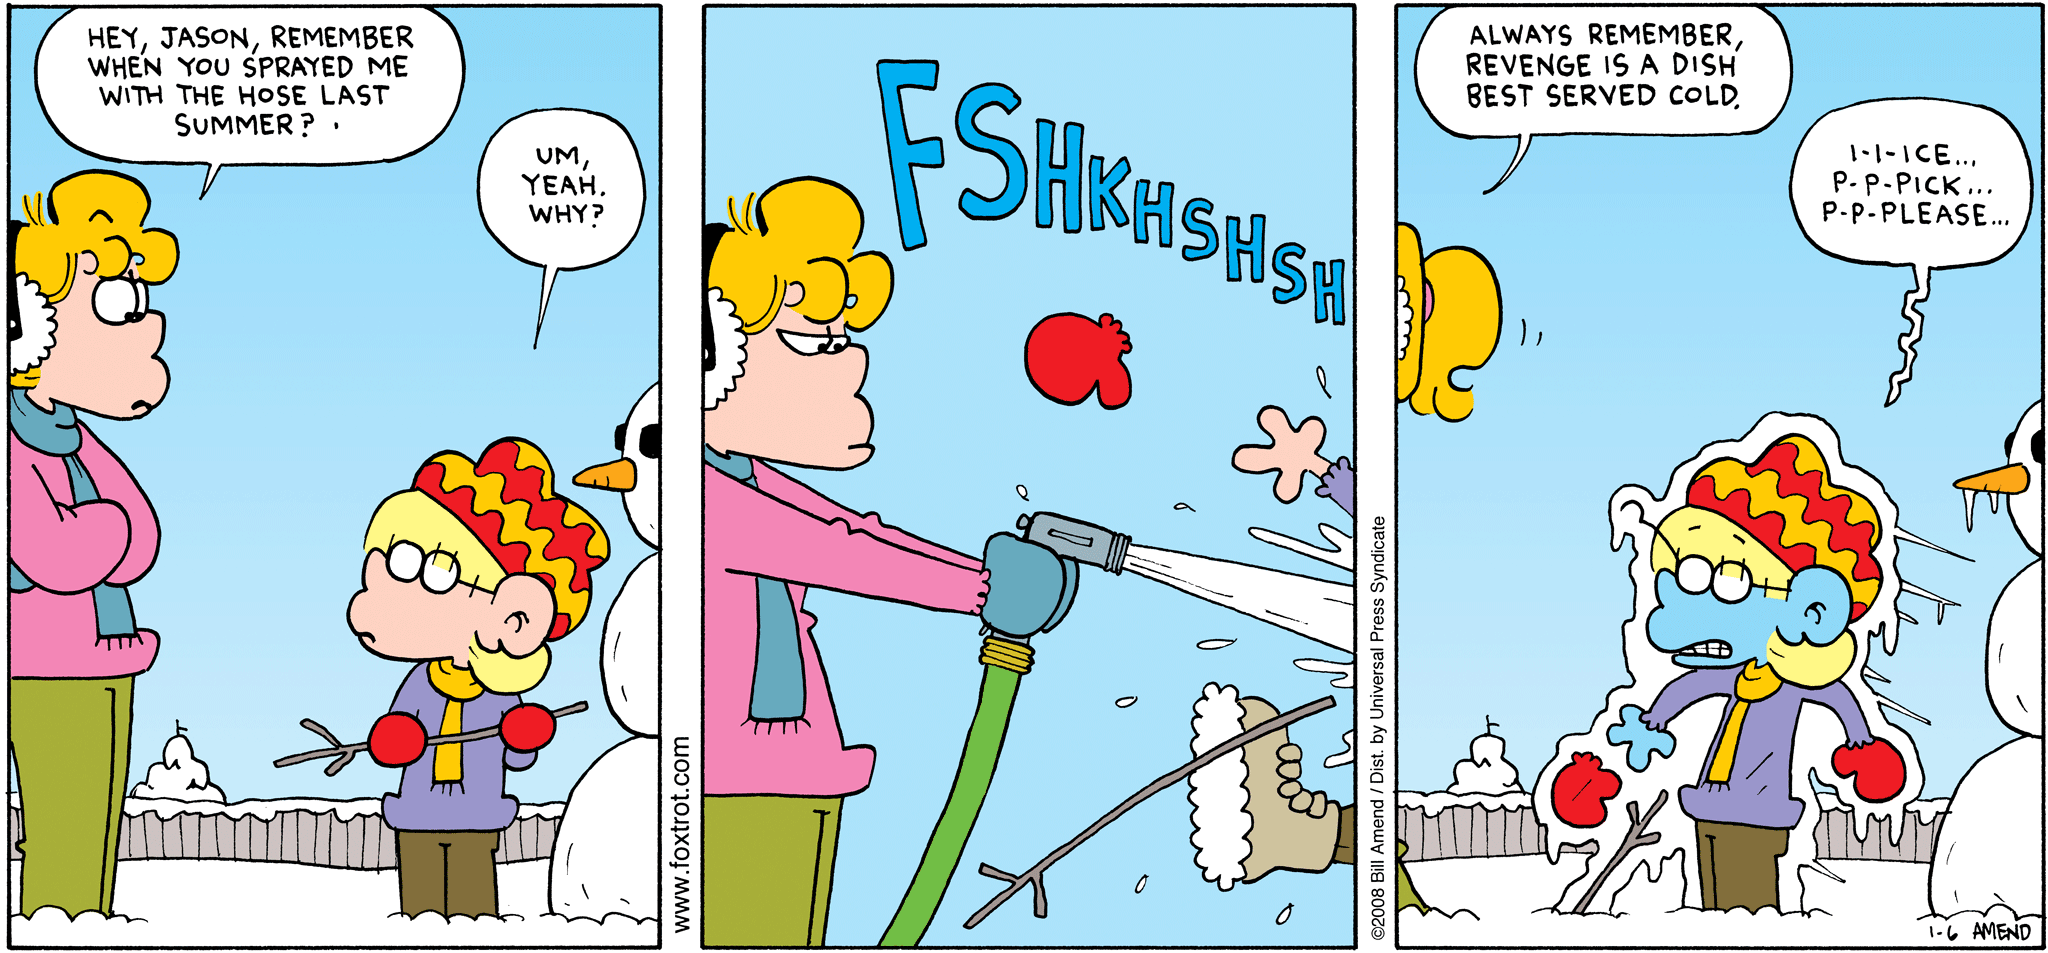 FoxTrot comic strip by Bill Amend - "Served Cold" published January 6, 2008 - Paige Fox: Hey, Jason Fox, remember when you sprayed me with the hose last summer? Jason Fox: Um, yeah. Why? Paige Fox: Always remember, revenge is a dish best served cold. Jason Fox: I-i-ice... p-p-pick... p-p-please...